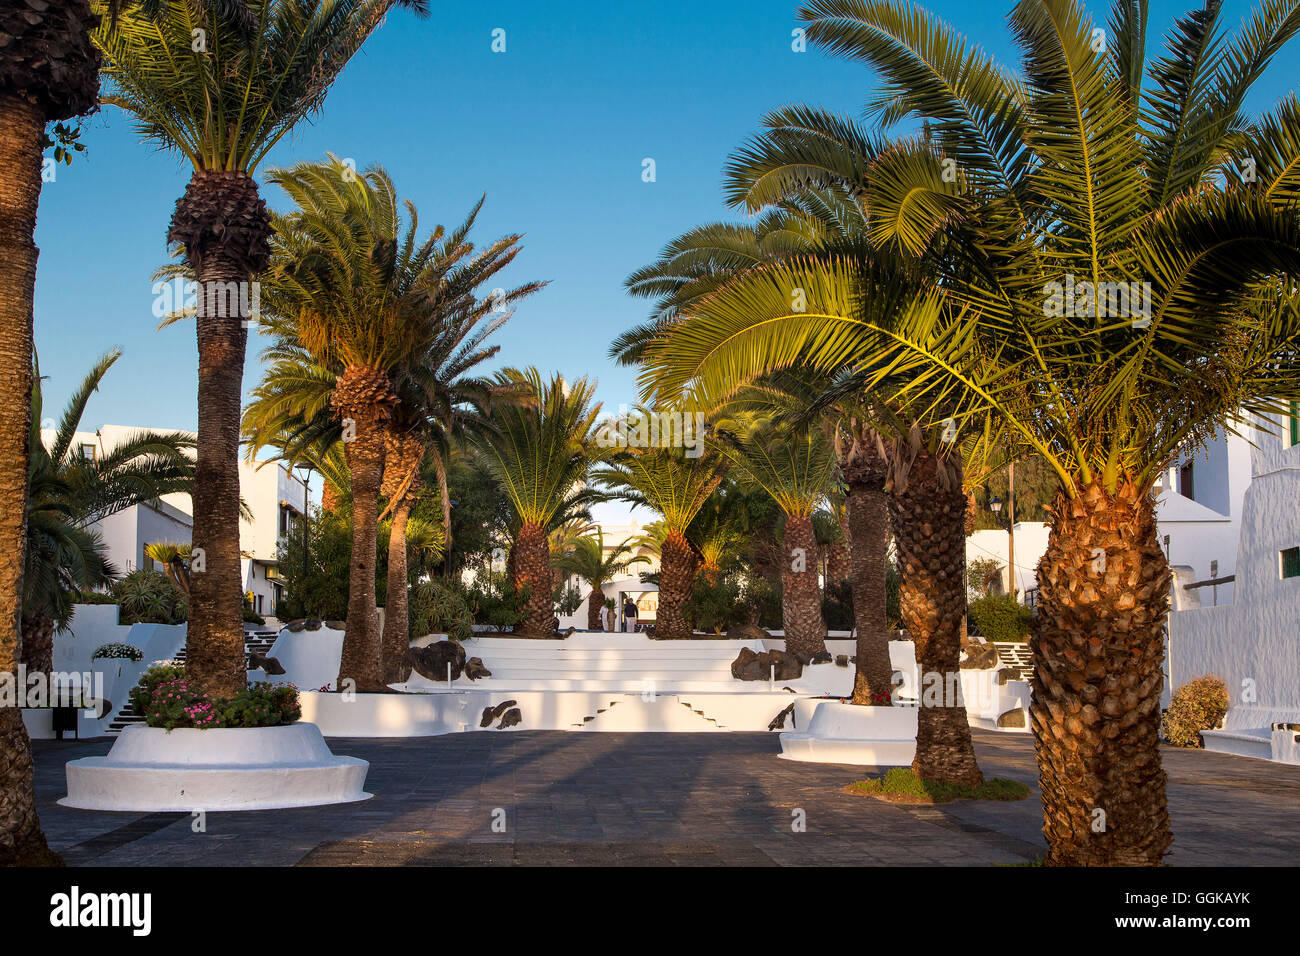 Square with Palm trees, San Bartolome, Lanzarote, Canary Islands, Spain Stock Photo